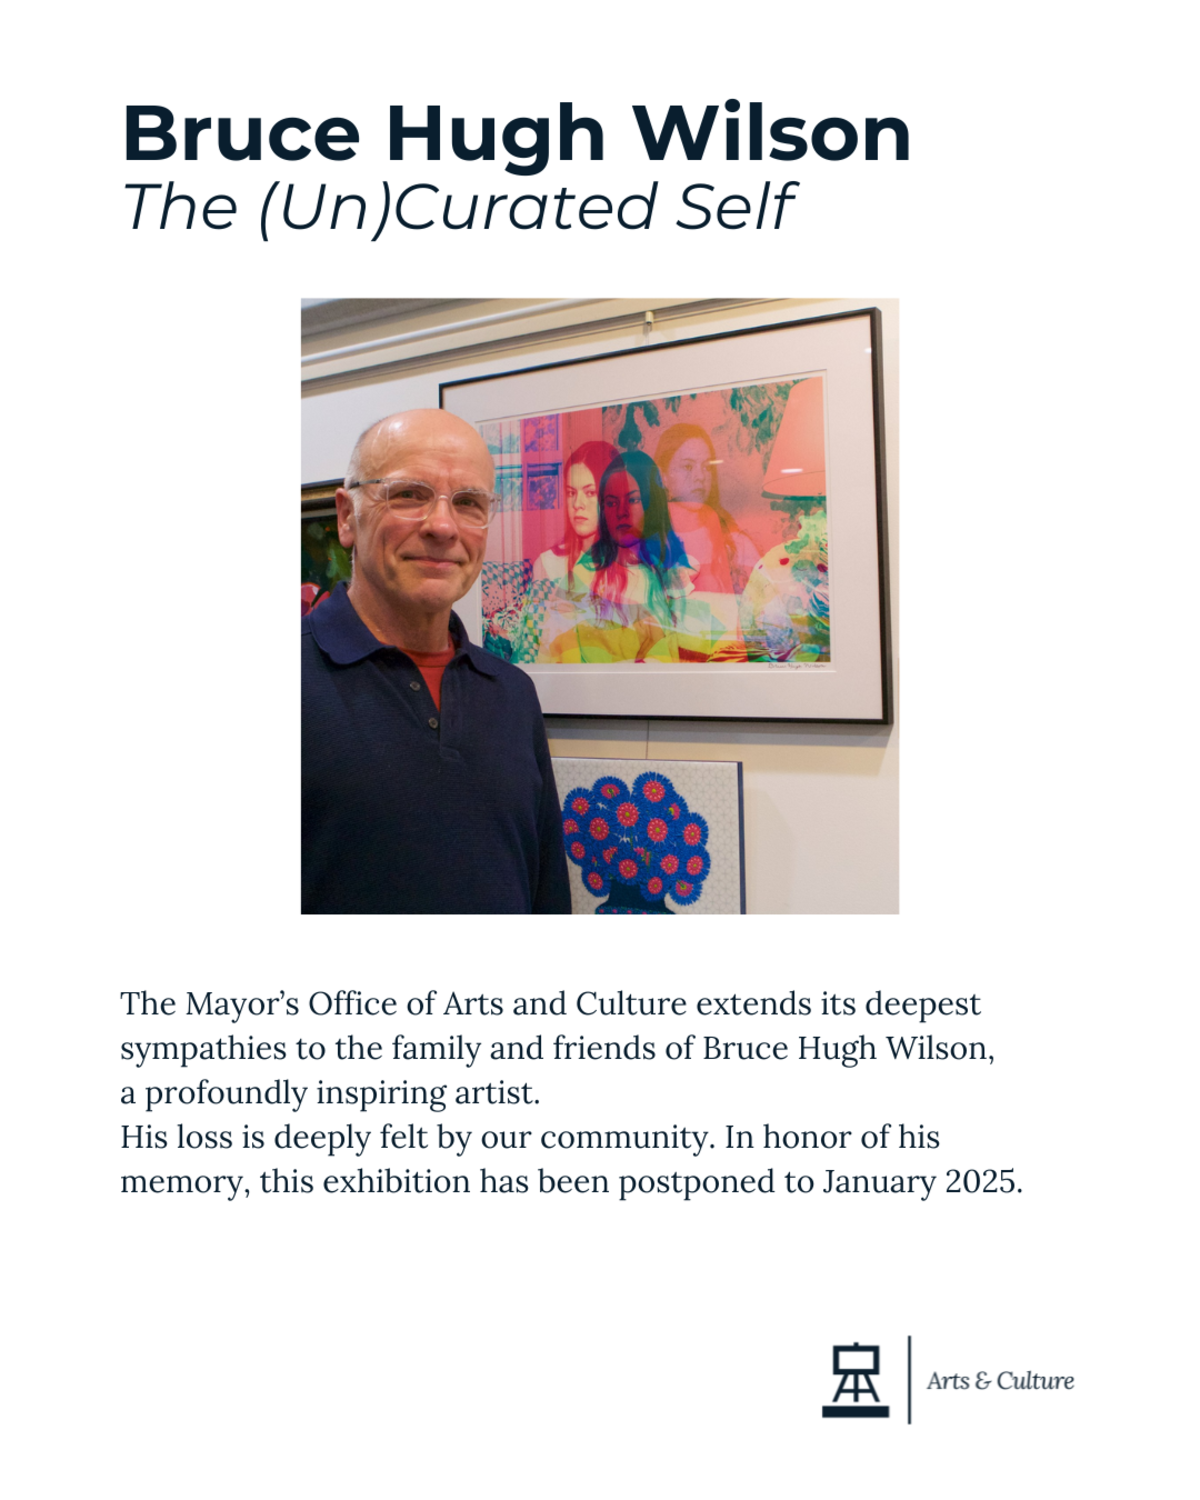 Image with text: "Bruce Hugh Wilson, The (Un)Censored Self - The Mayor’s Office of Arts and Culture extends its deepest sympathies to the family and friends of Bruce Hugh Wilson, a profoundly inspiring artist. His loss is deeply felt by our community. In honor of his memory, this exhibition has been postponed to January 2025."